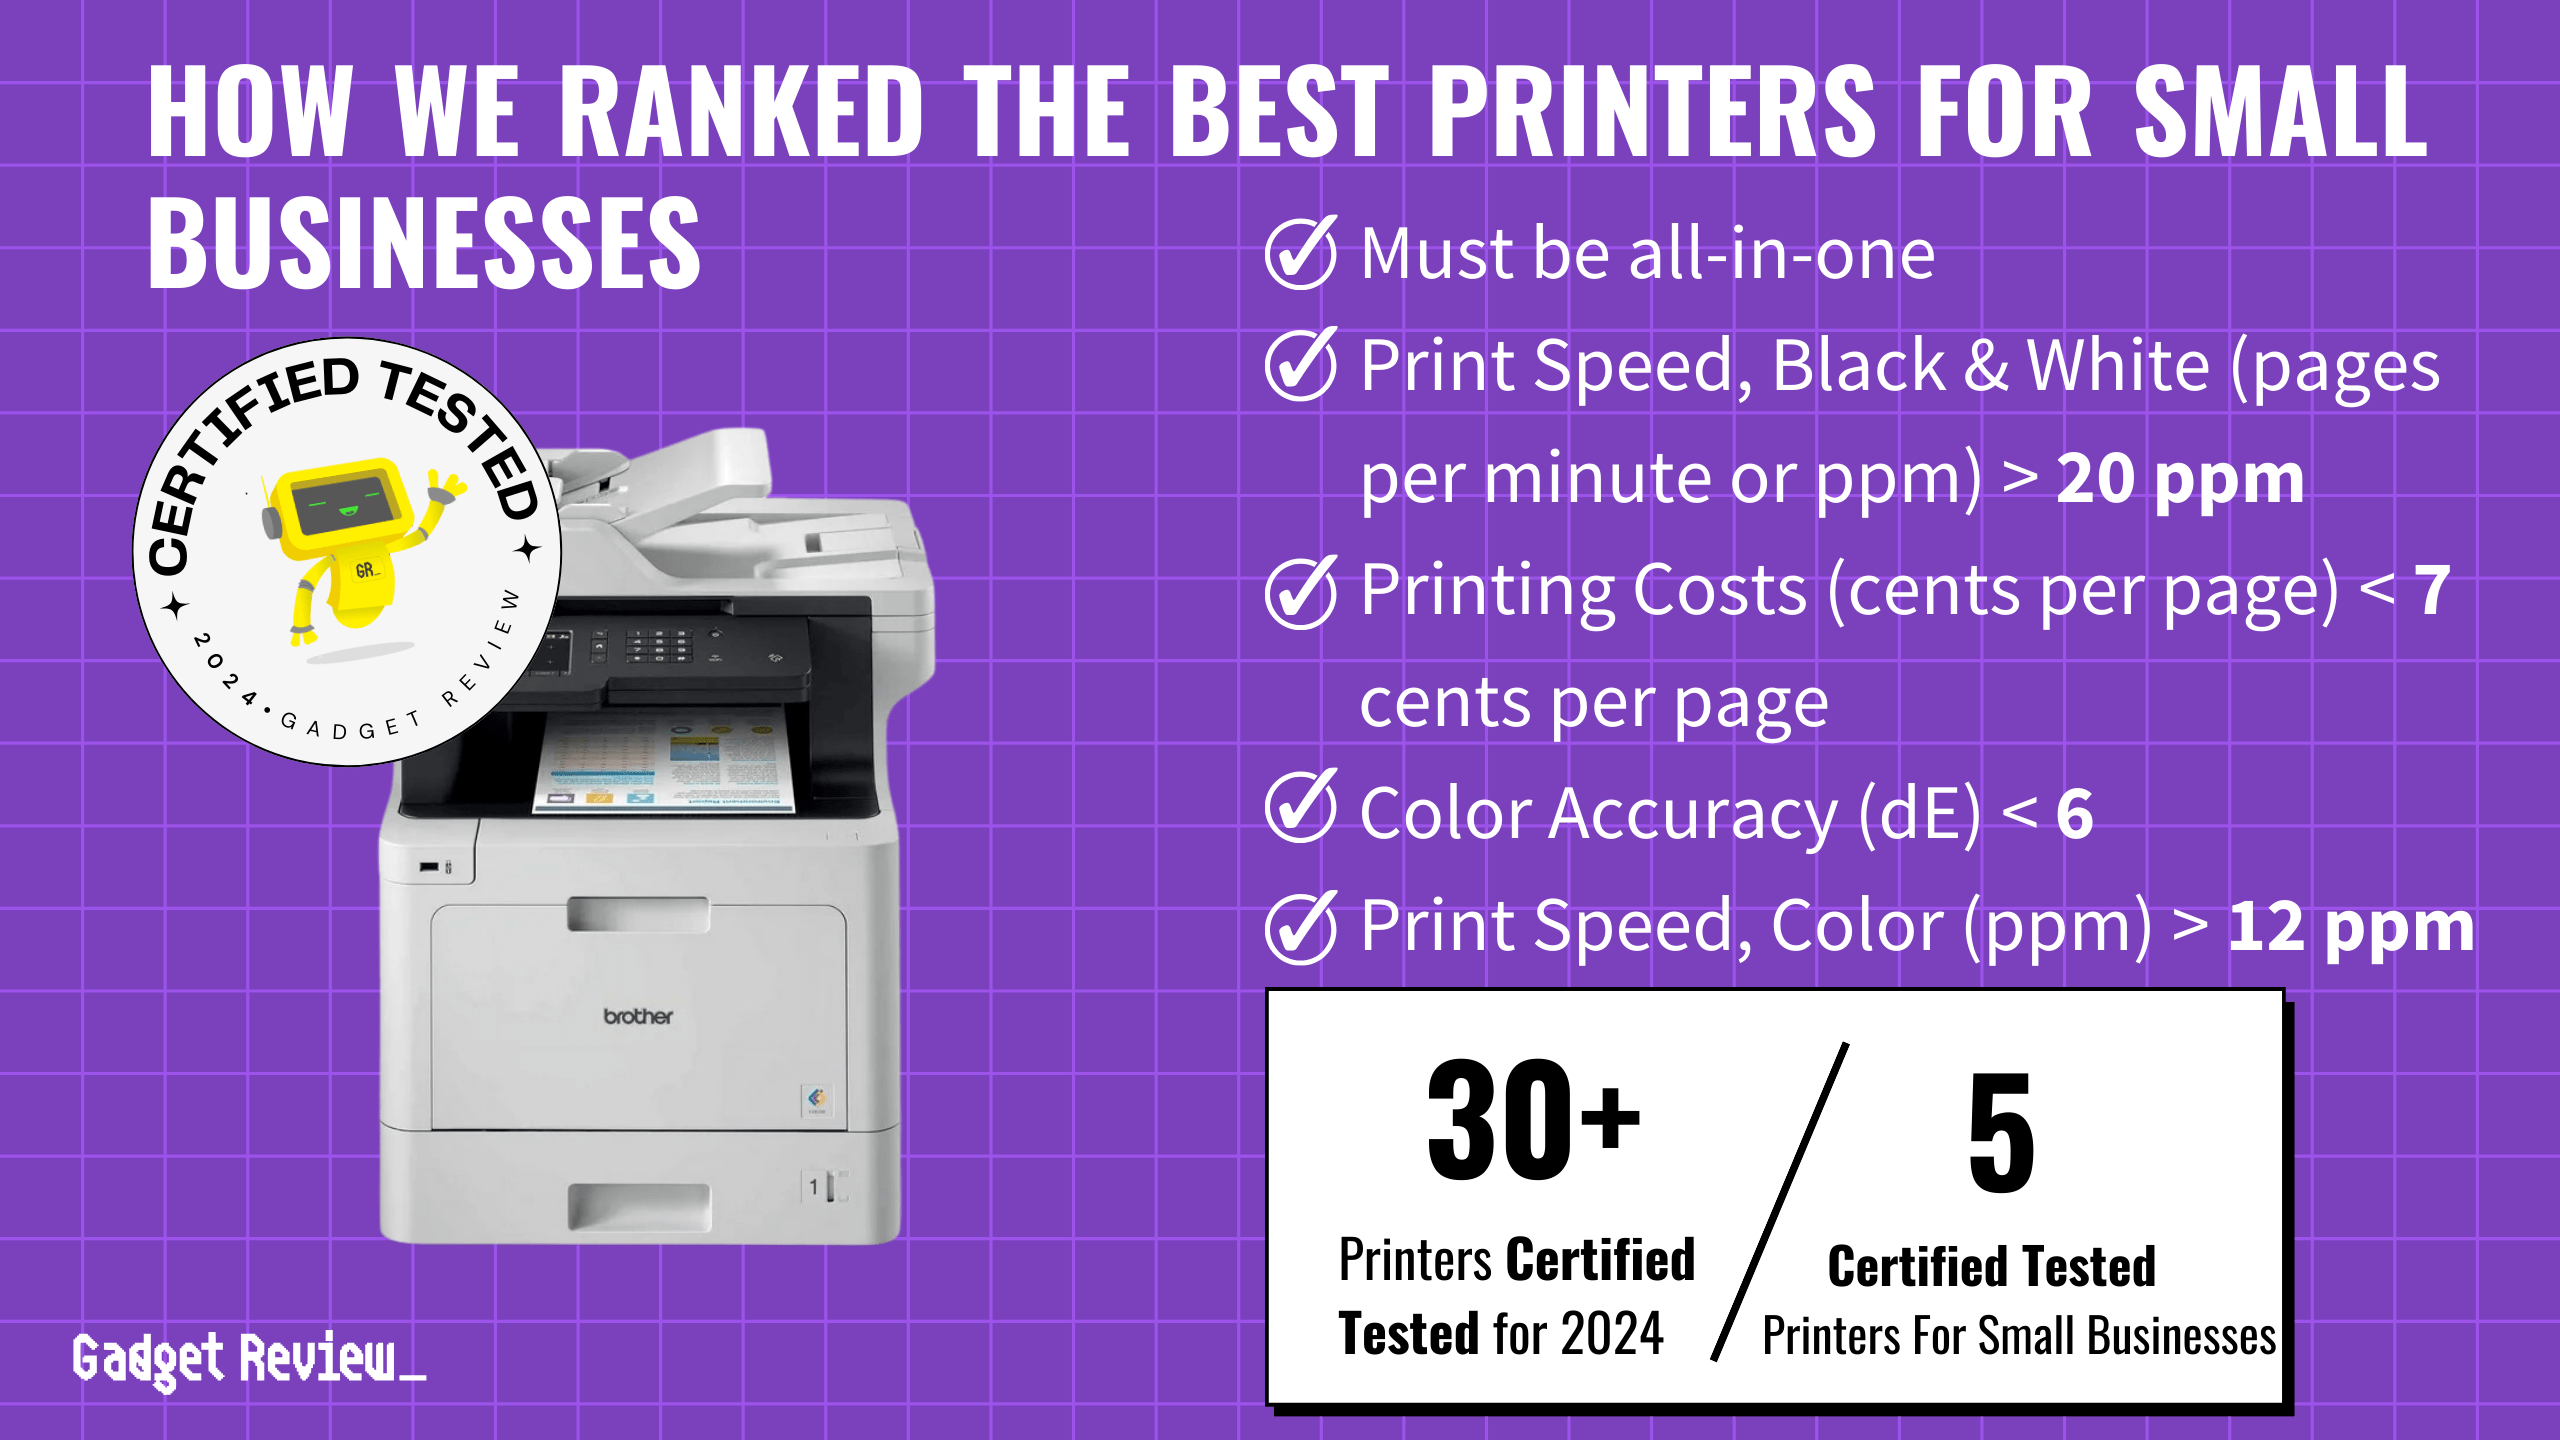 5 Top Printers for Small Business of 2024 Ranked